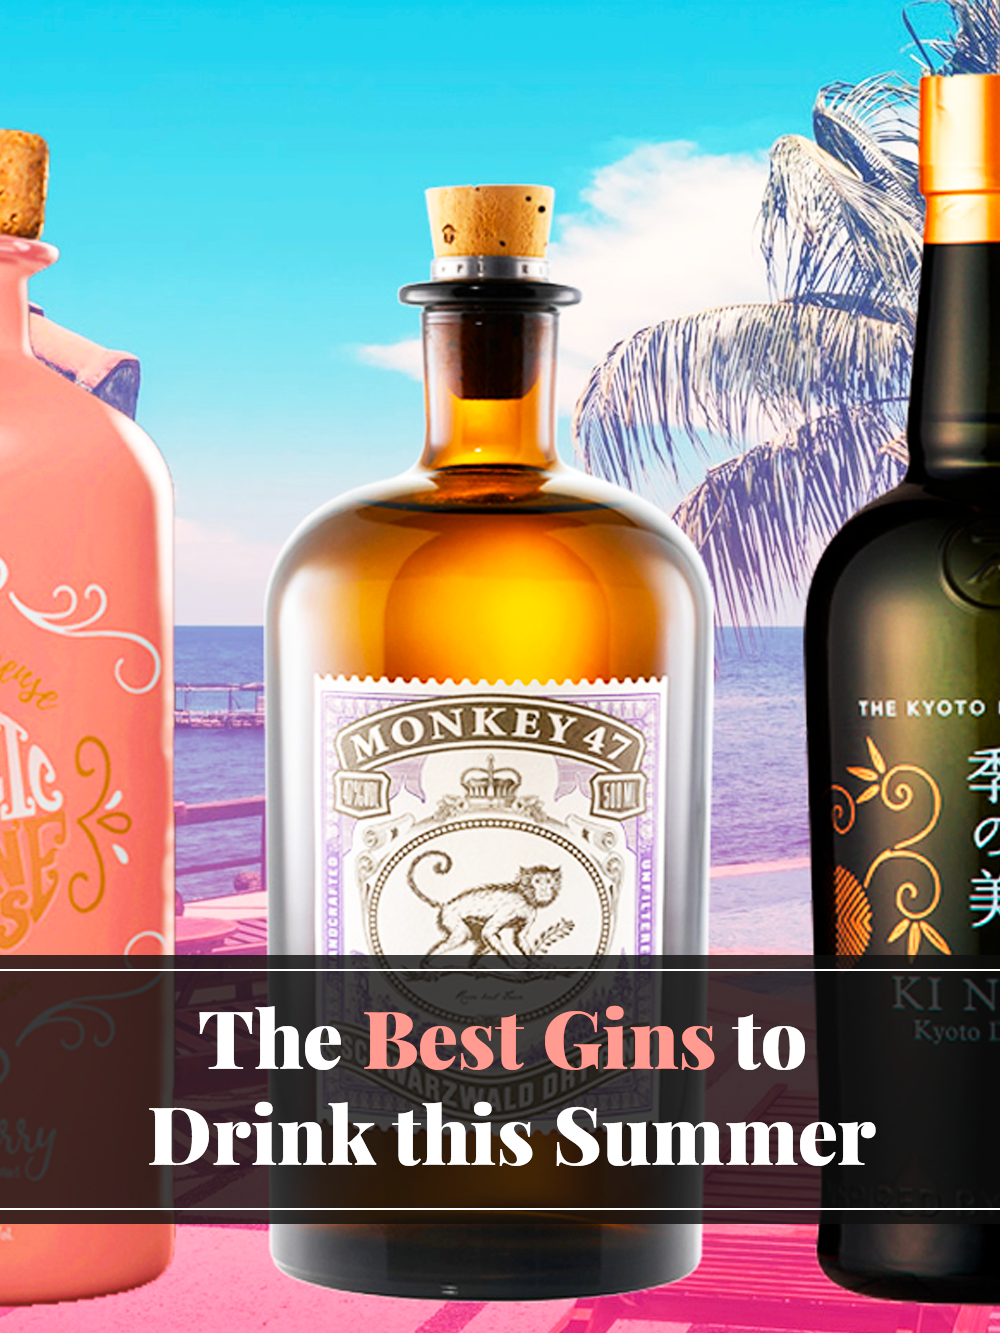 The Best Gins to Drink this Summer 2019